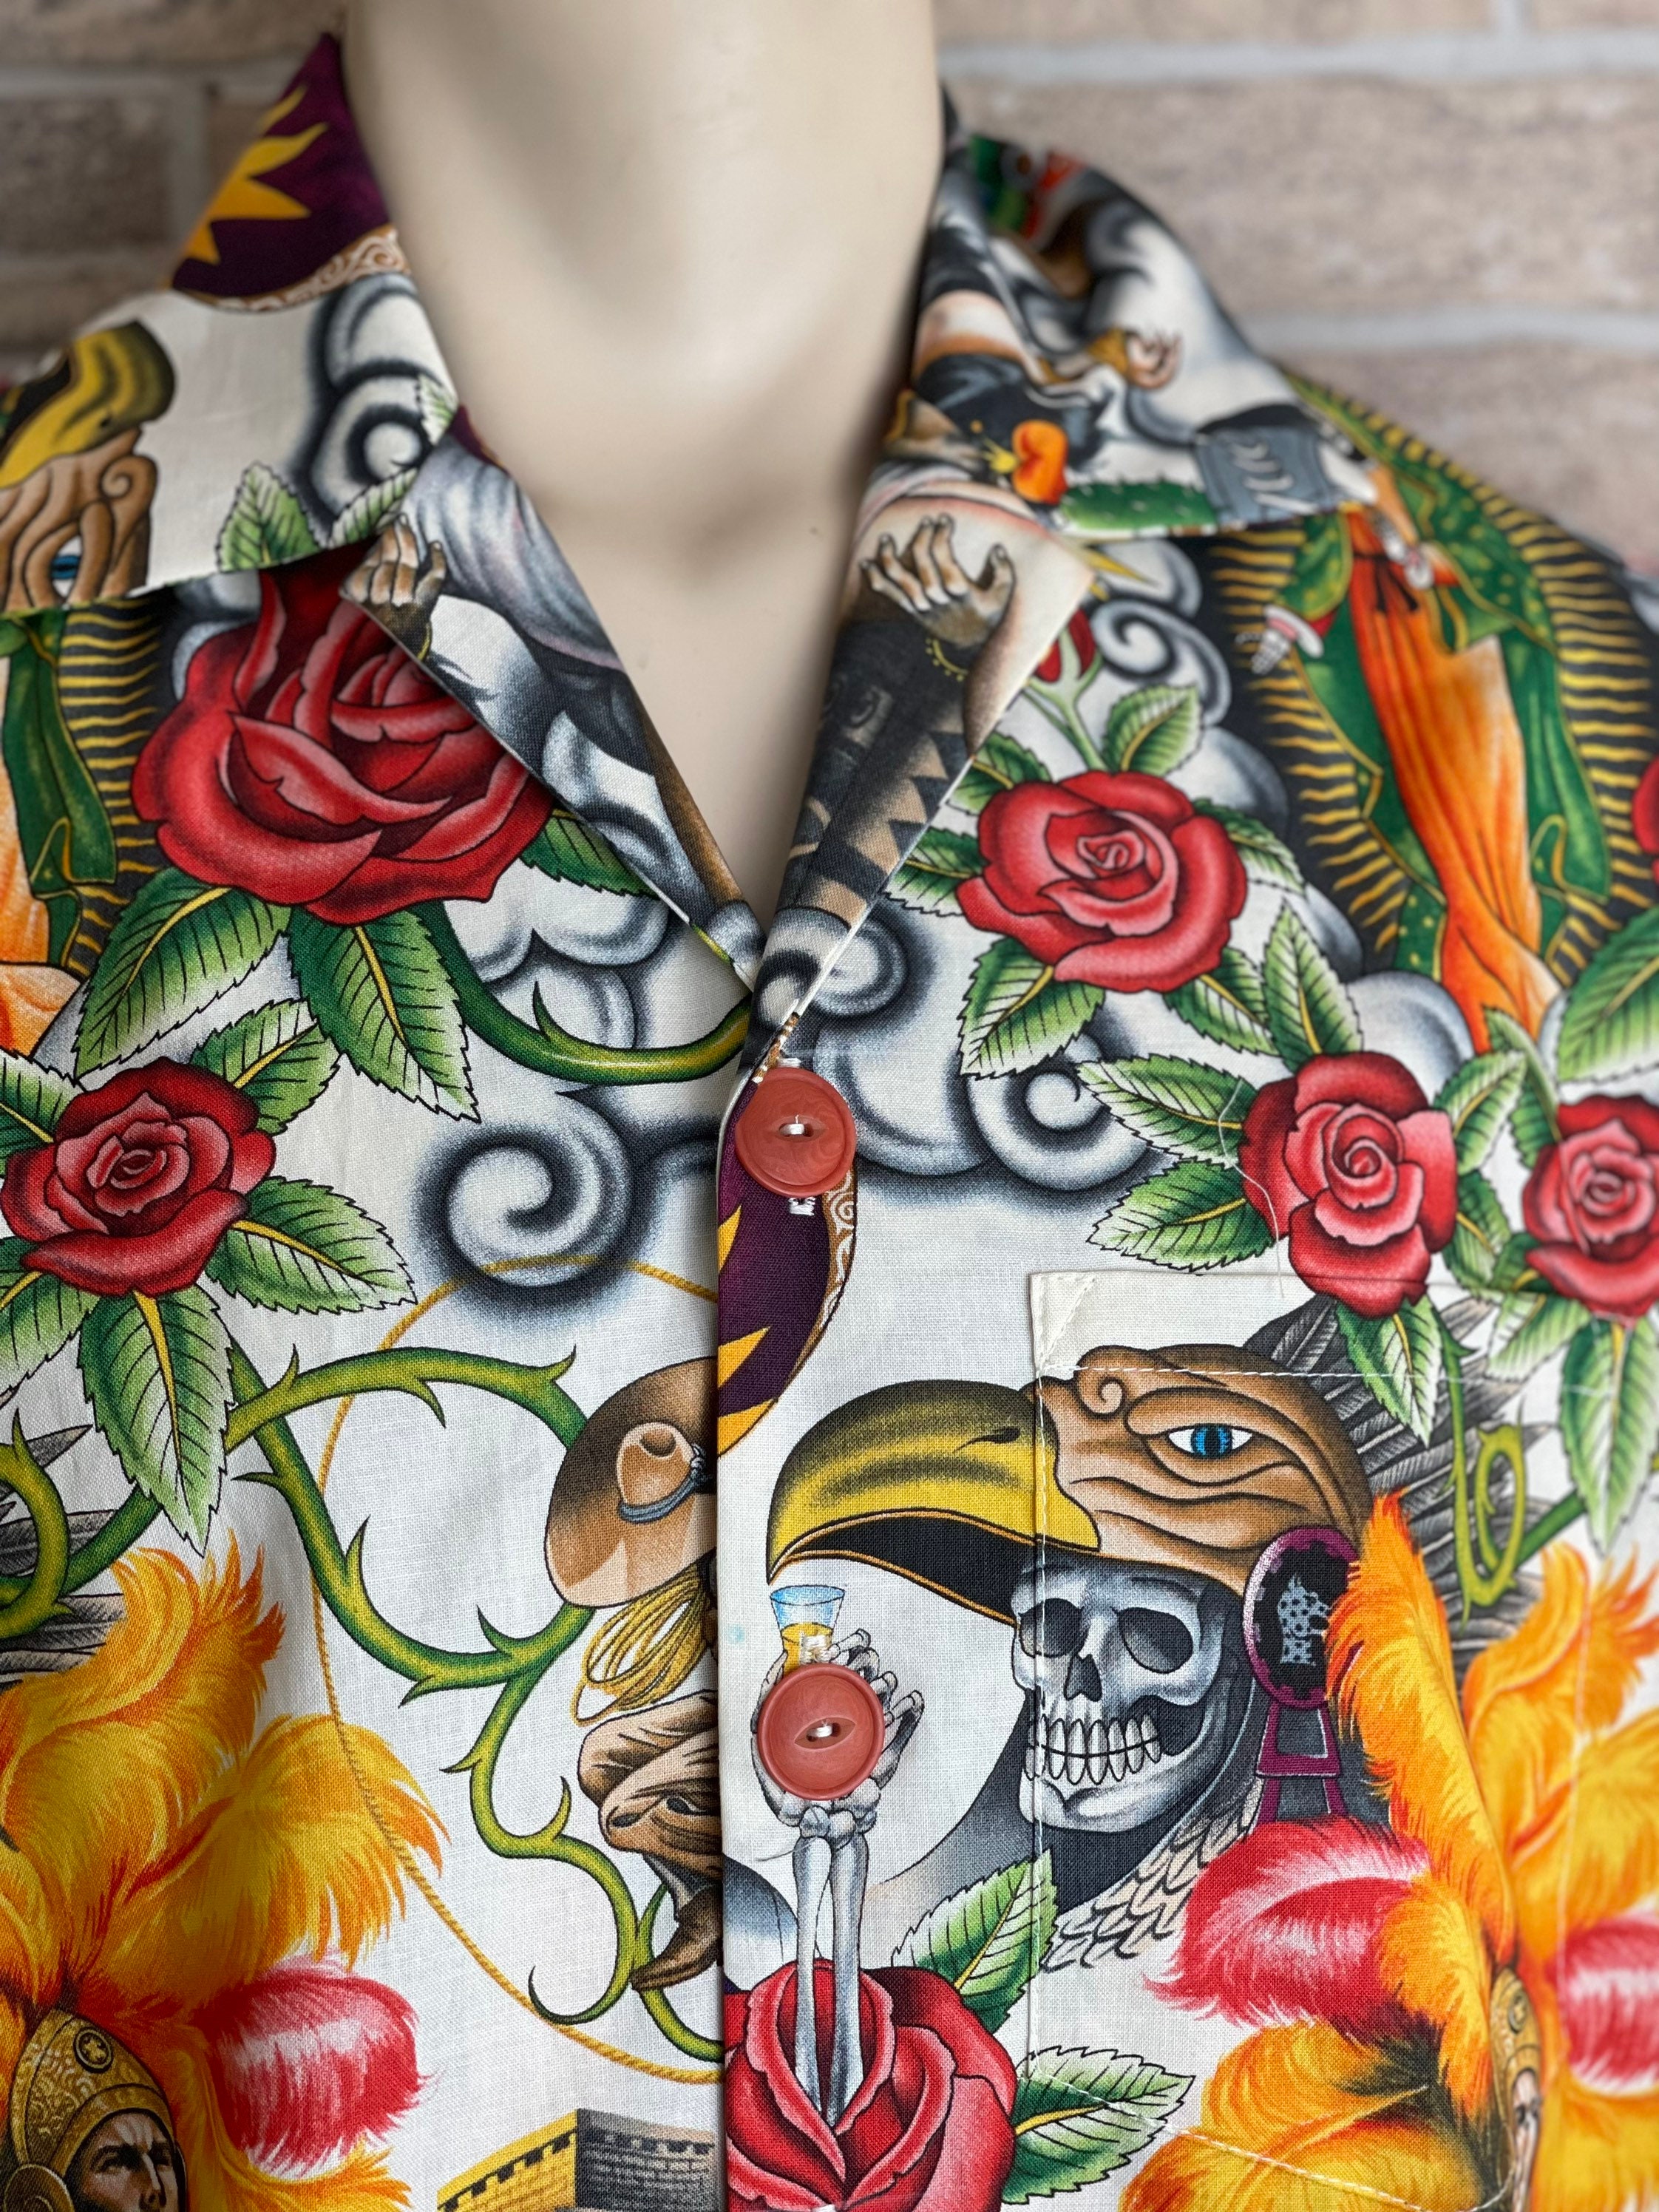 Dia de los muertos Hawaiian shirt with inspired images of the Virgin of Guadalupe